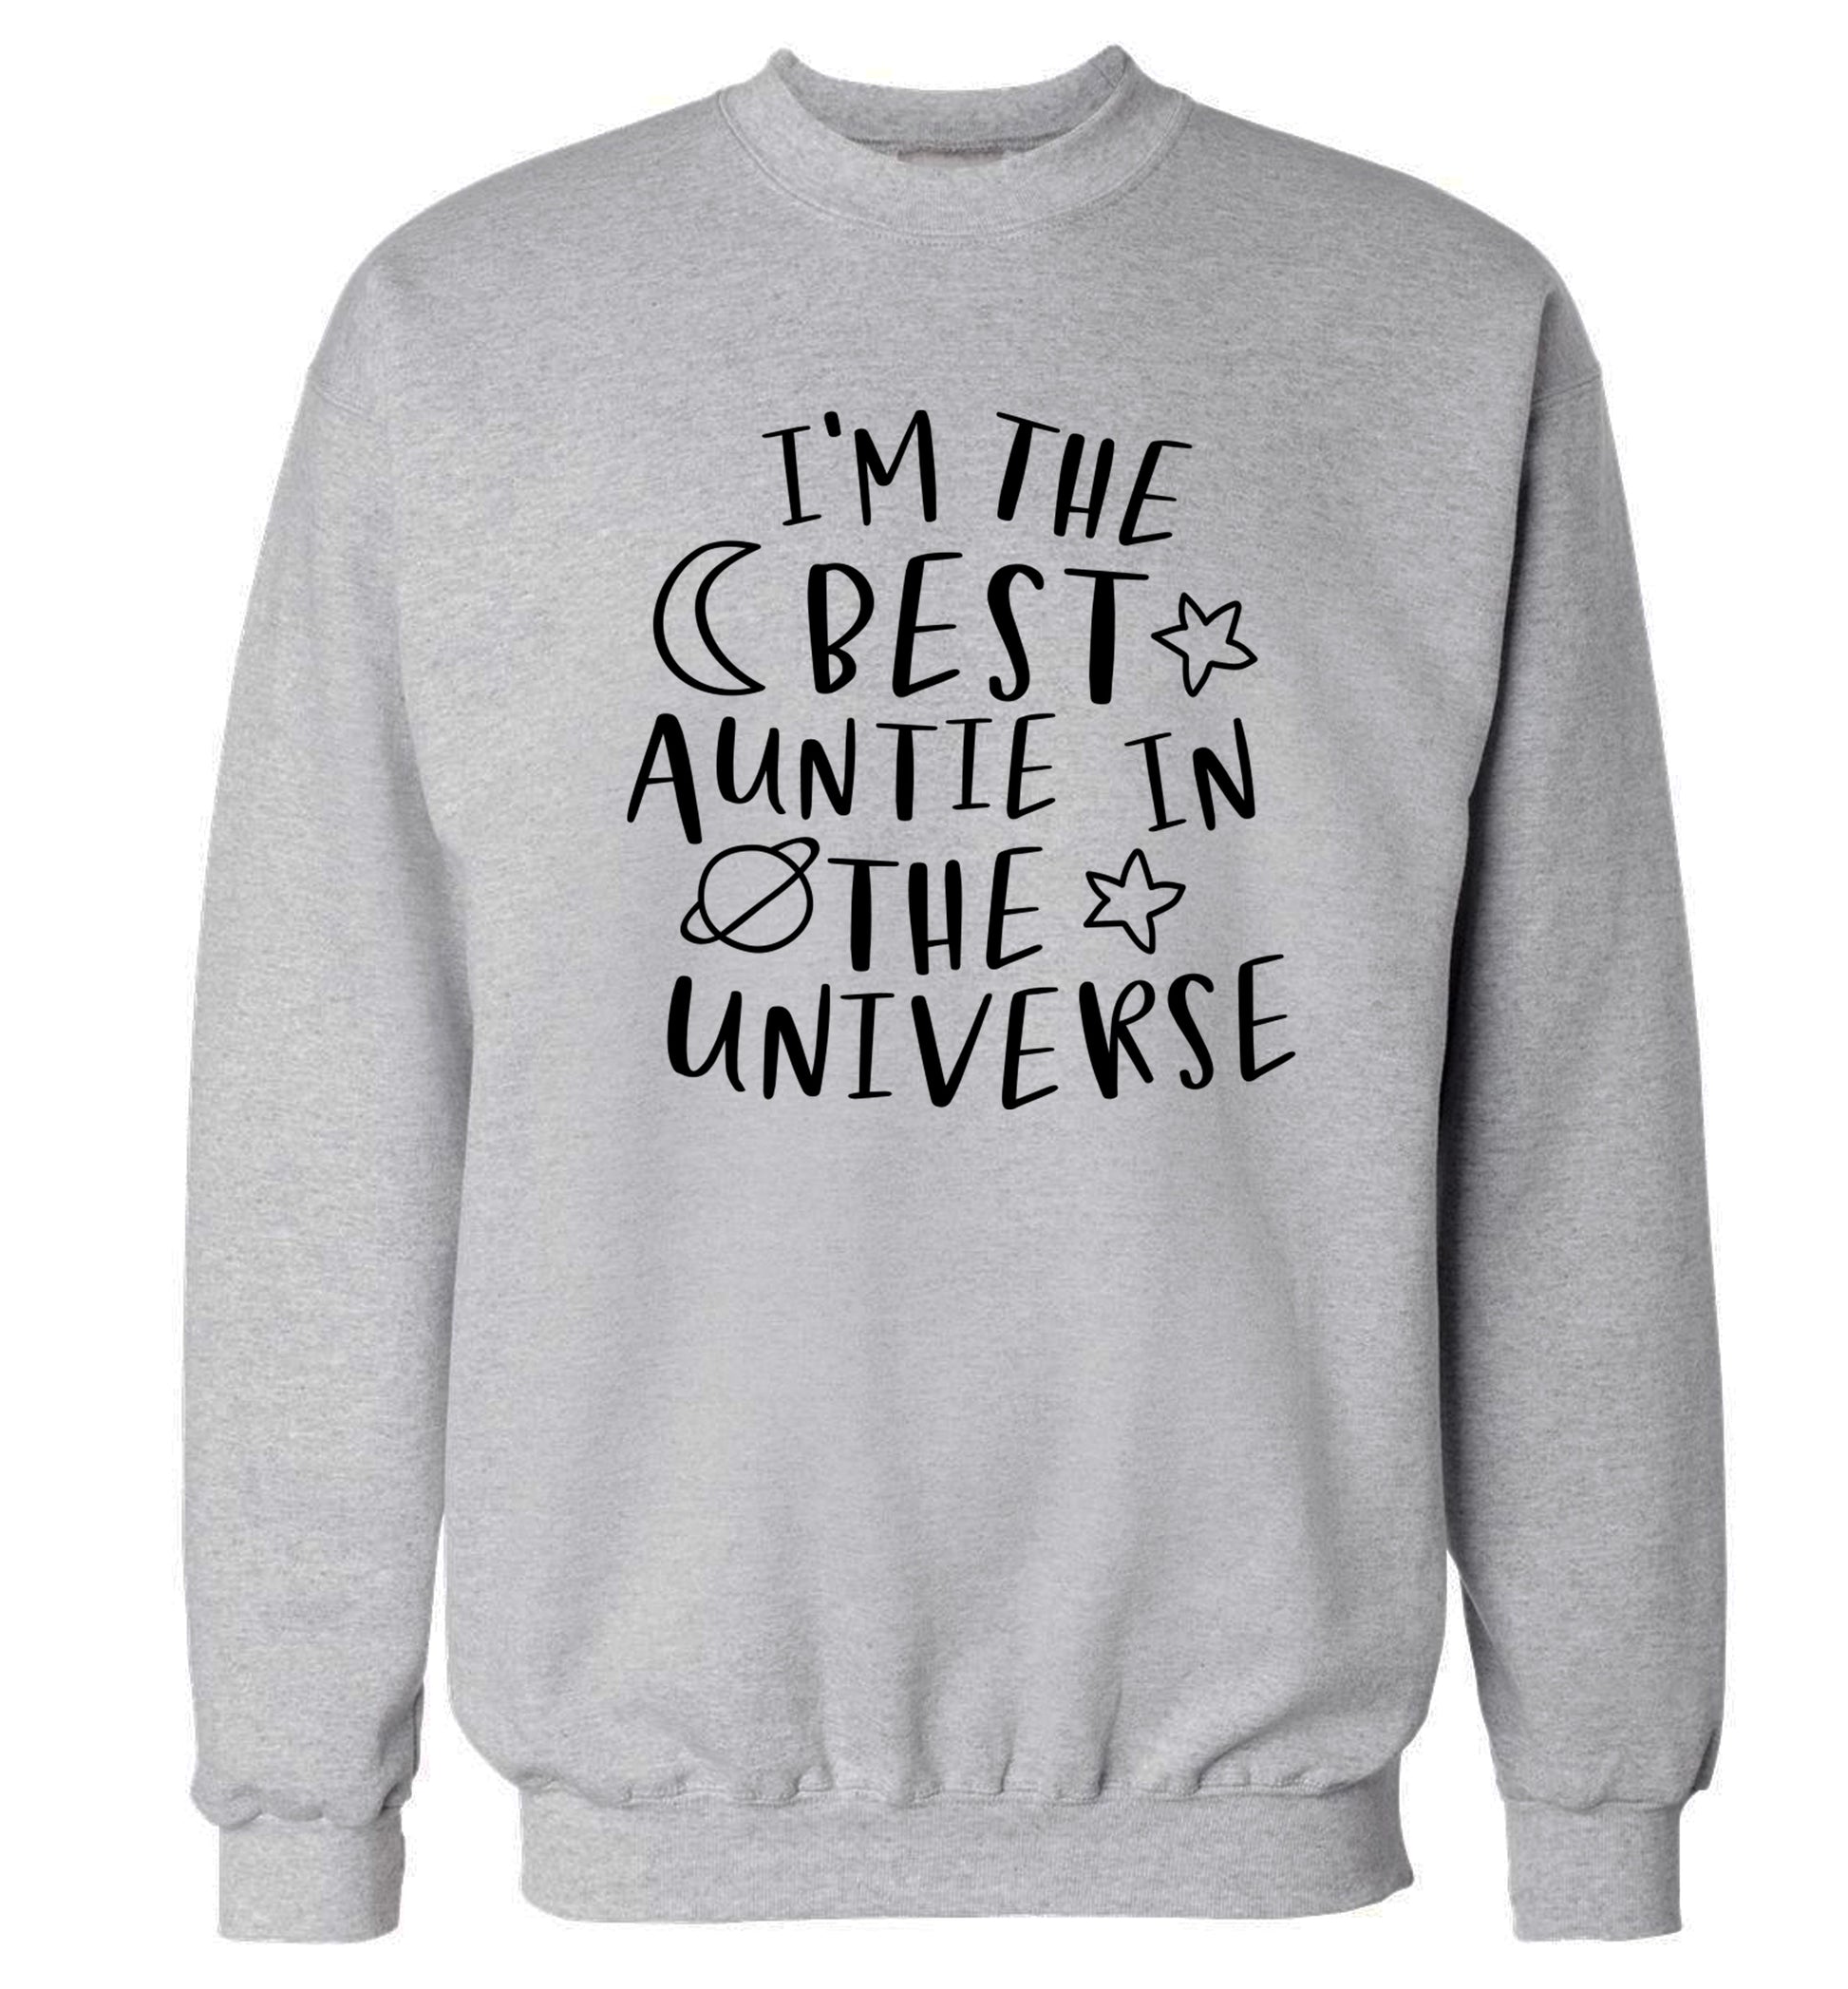 I'm the best auntie in the universe Adult's unisex grey Sweater 2XL